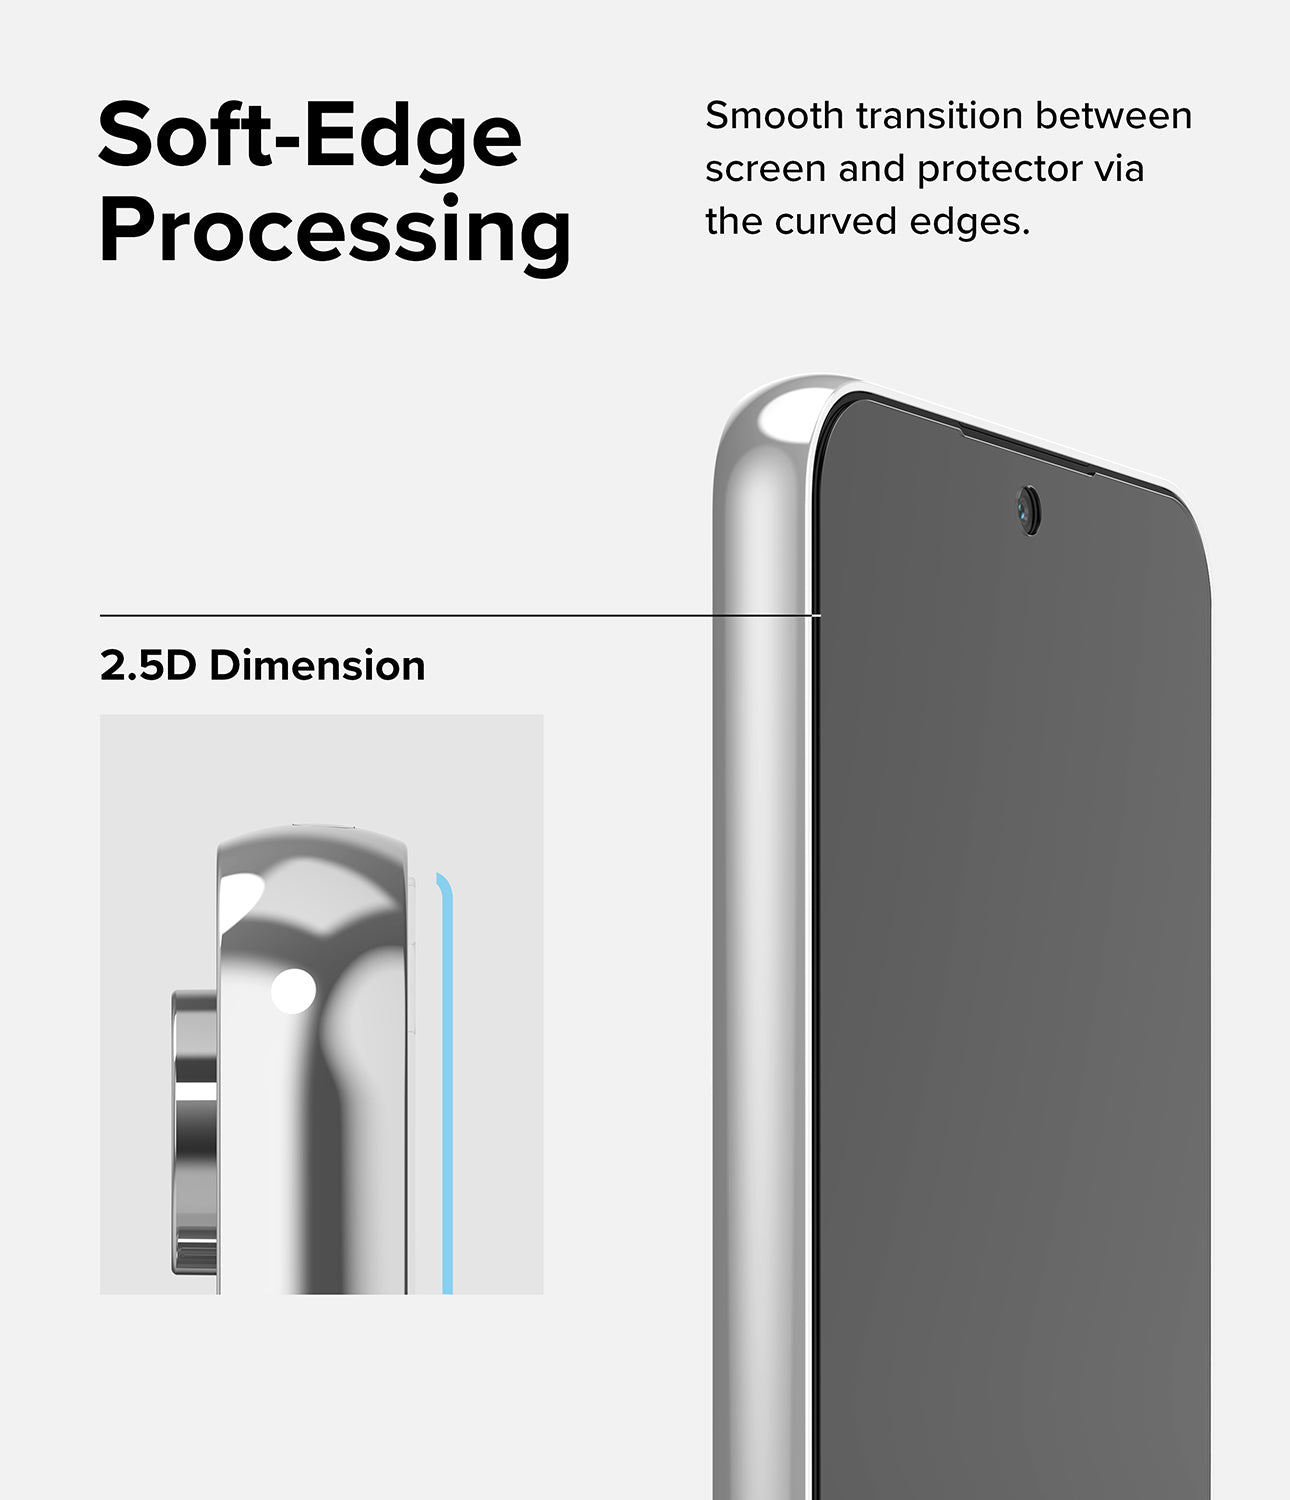 Soft-Edge Processing - Smooth transition between screen and protector via the curved edges.